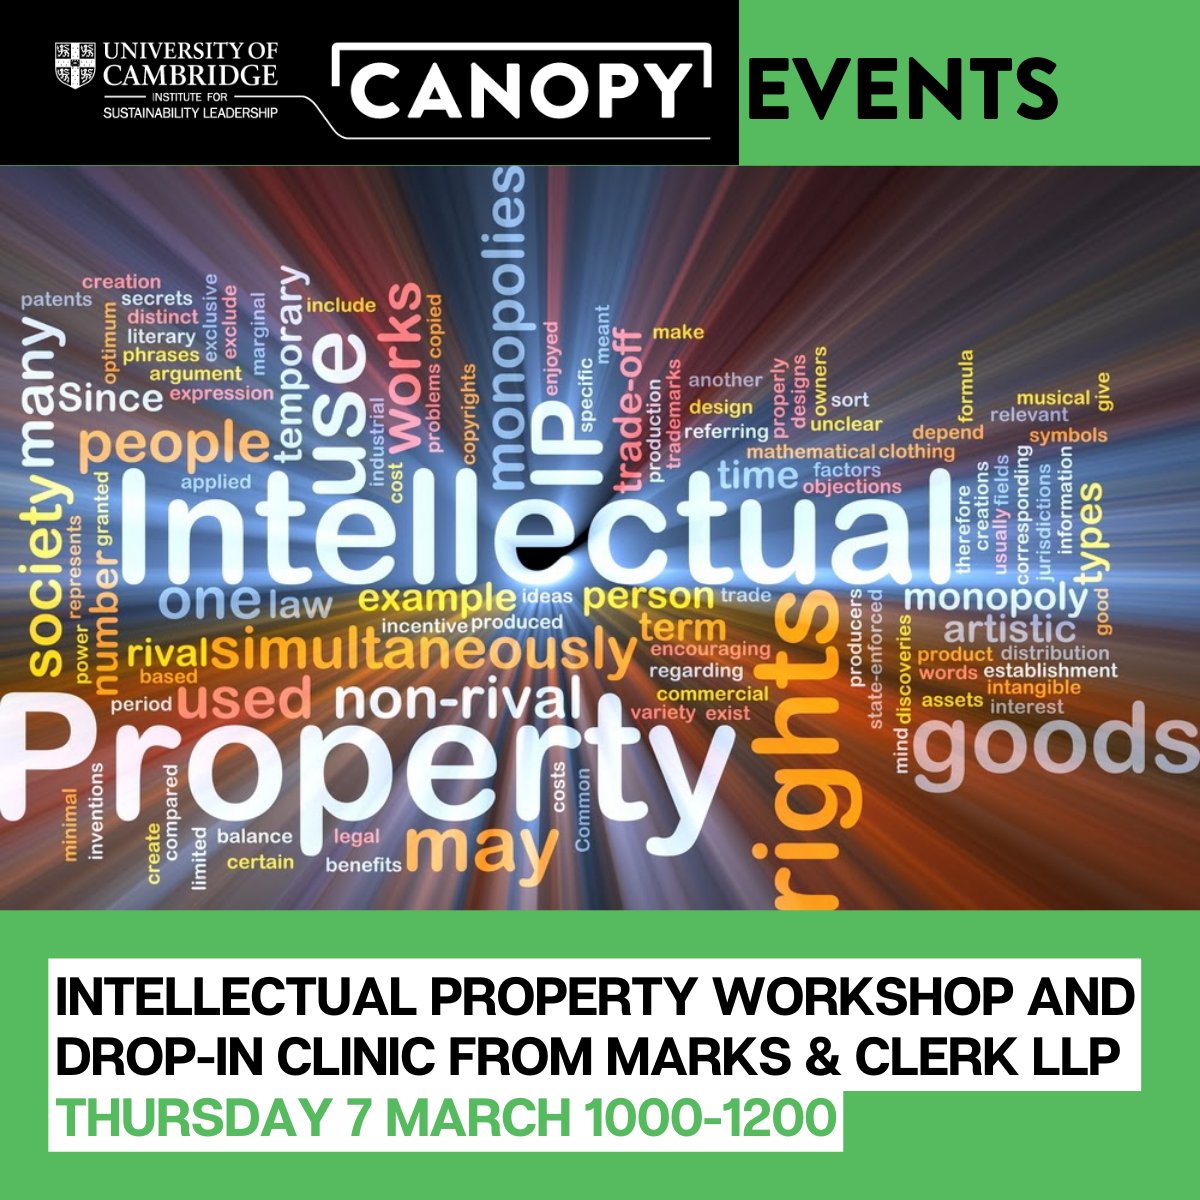 🤔 Curious about Intellectual Property (IP) & patents? 💡Join us for an exclusive event hosted by @marksandclerk bit.ly/IPWorkshopandC… Explore the world of IP with insights from Matt Pinney, a seasoned patent attorney. #IP #Patents #IECambridge #CISL #Cambridge #Innovate